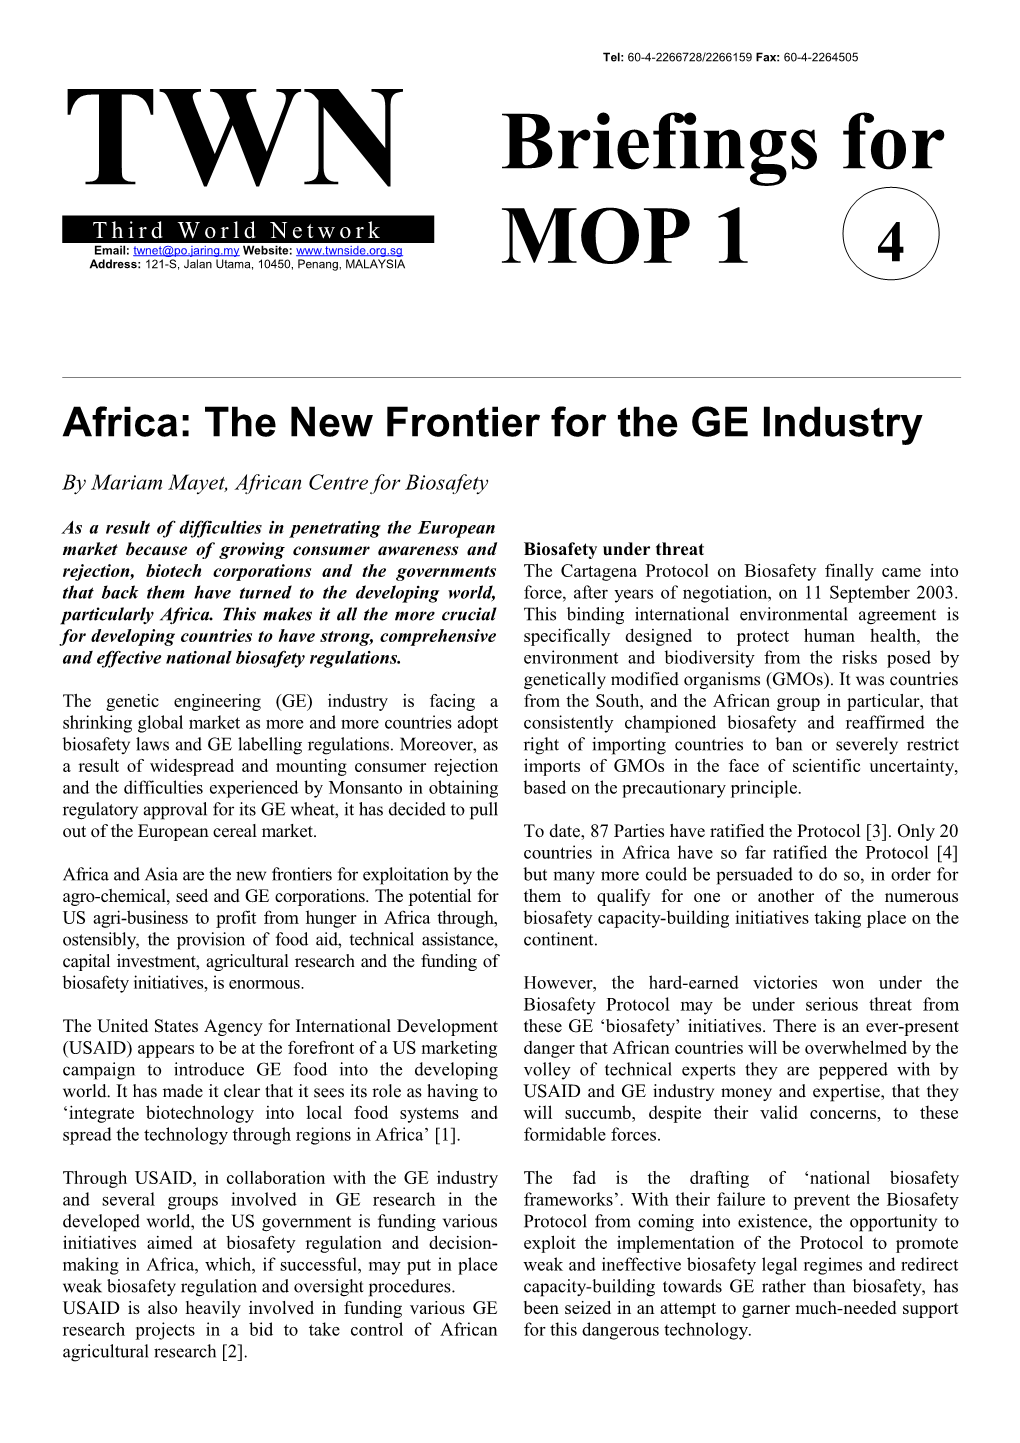 Africa: the New Frontier for the GE Industry